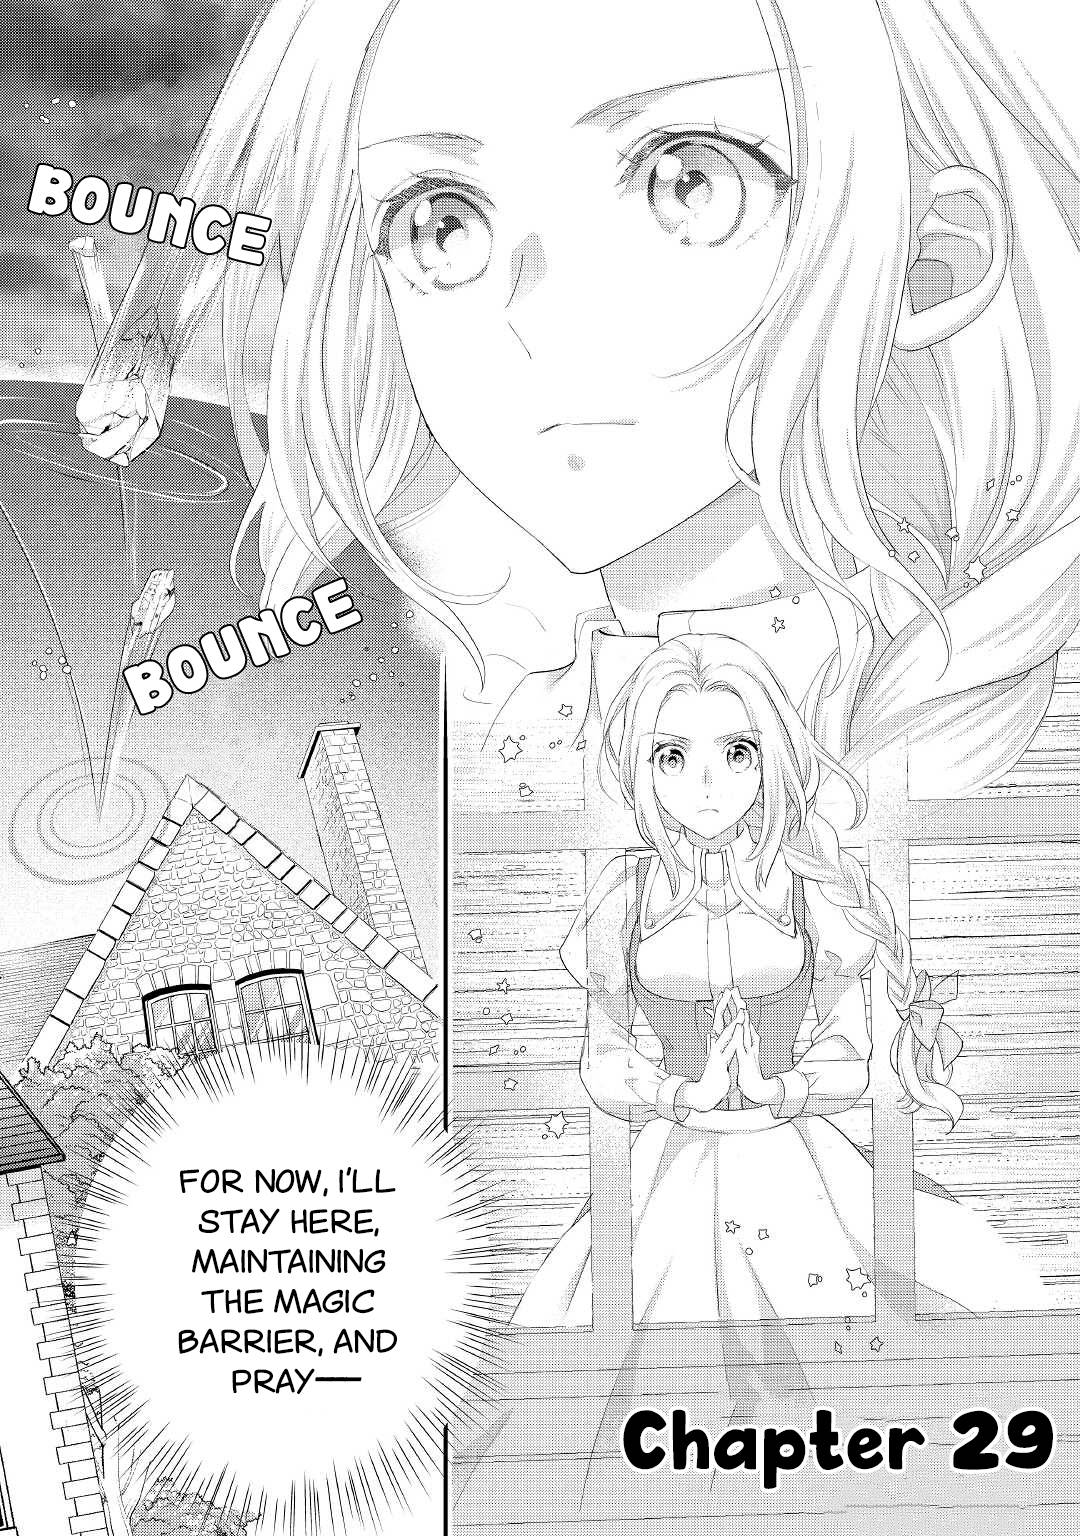 Milady Just Wants to Relax - chapter 29 - #2